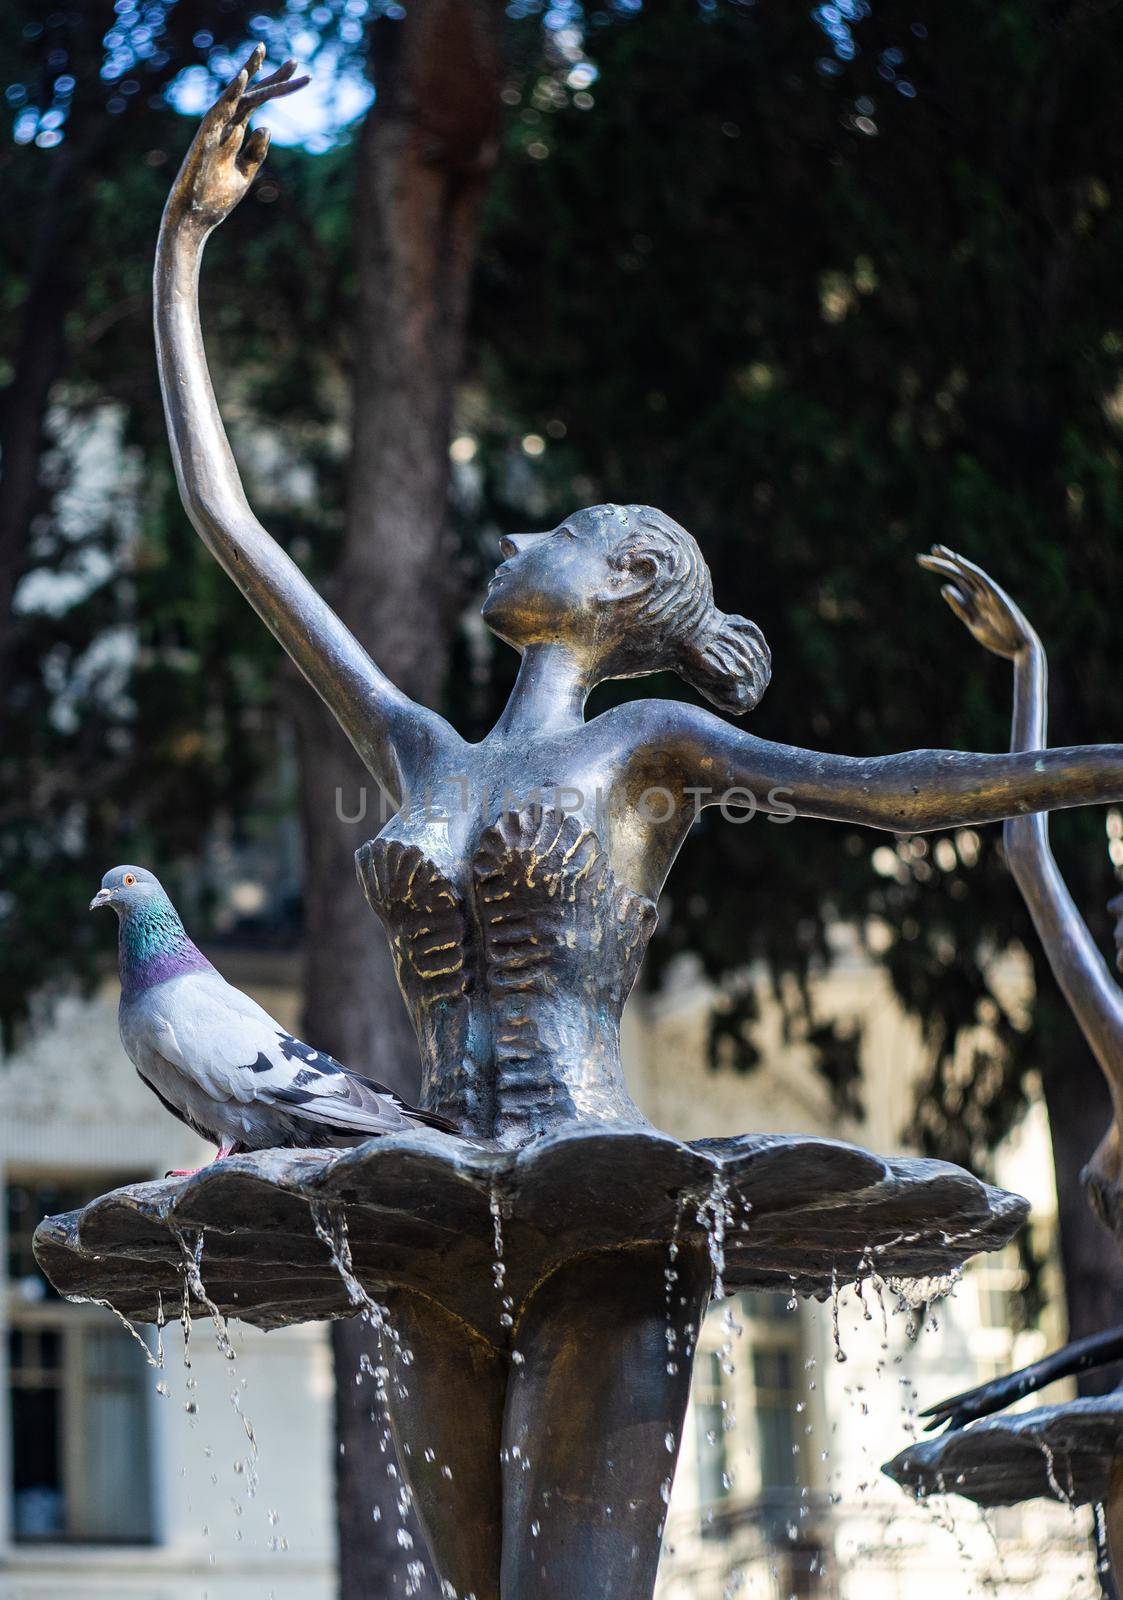 Famous ballet dancer fountain at Tbilisi State Opera House on Rustaveli avenue